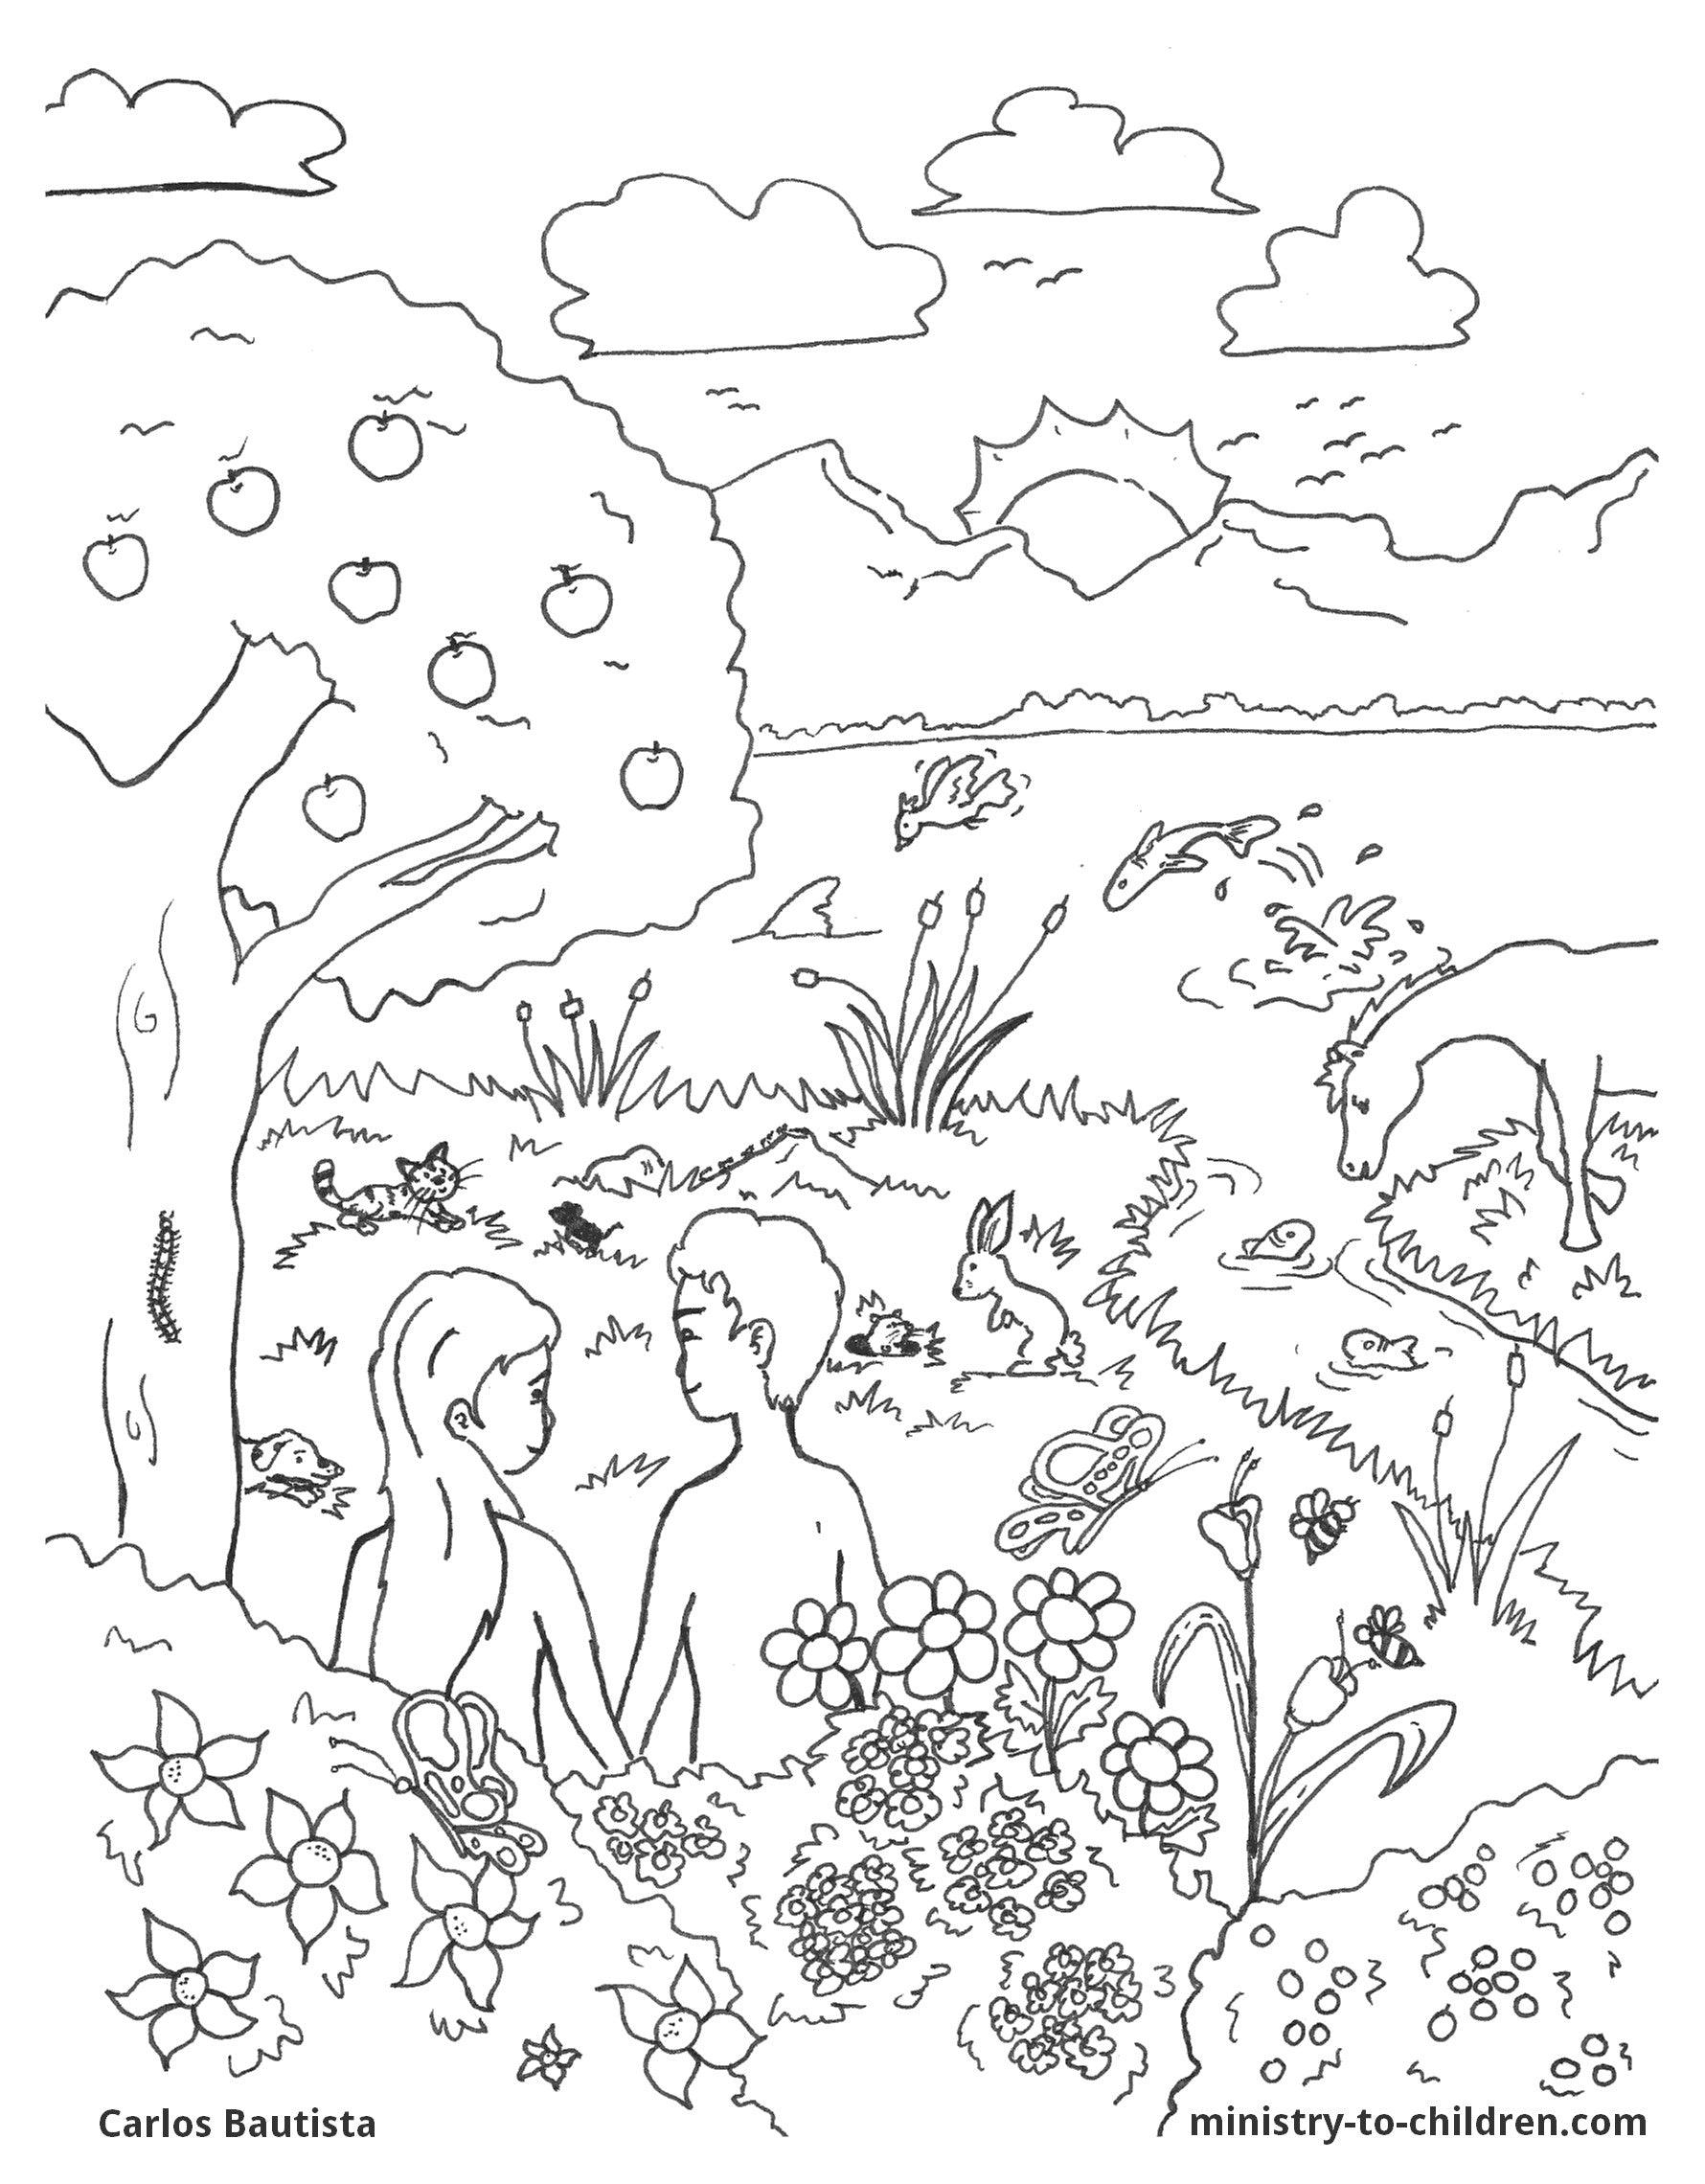 Ellen's Timeless Creations, 2015-2020.  Coloring books, Creation, Coloring  pages